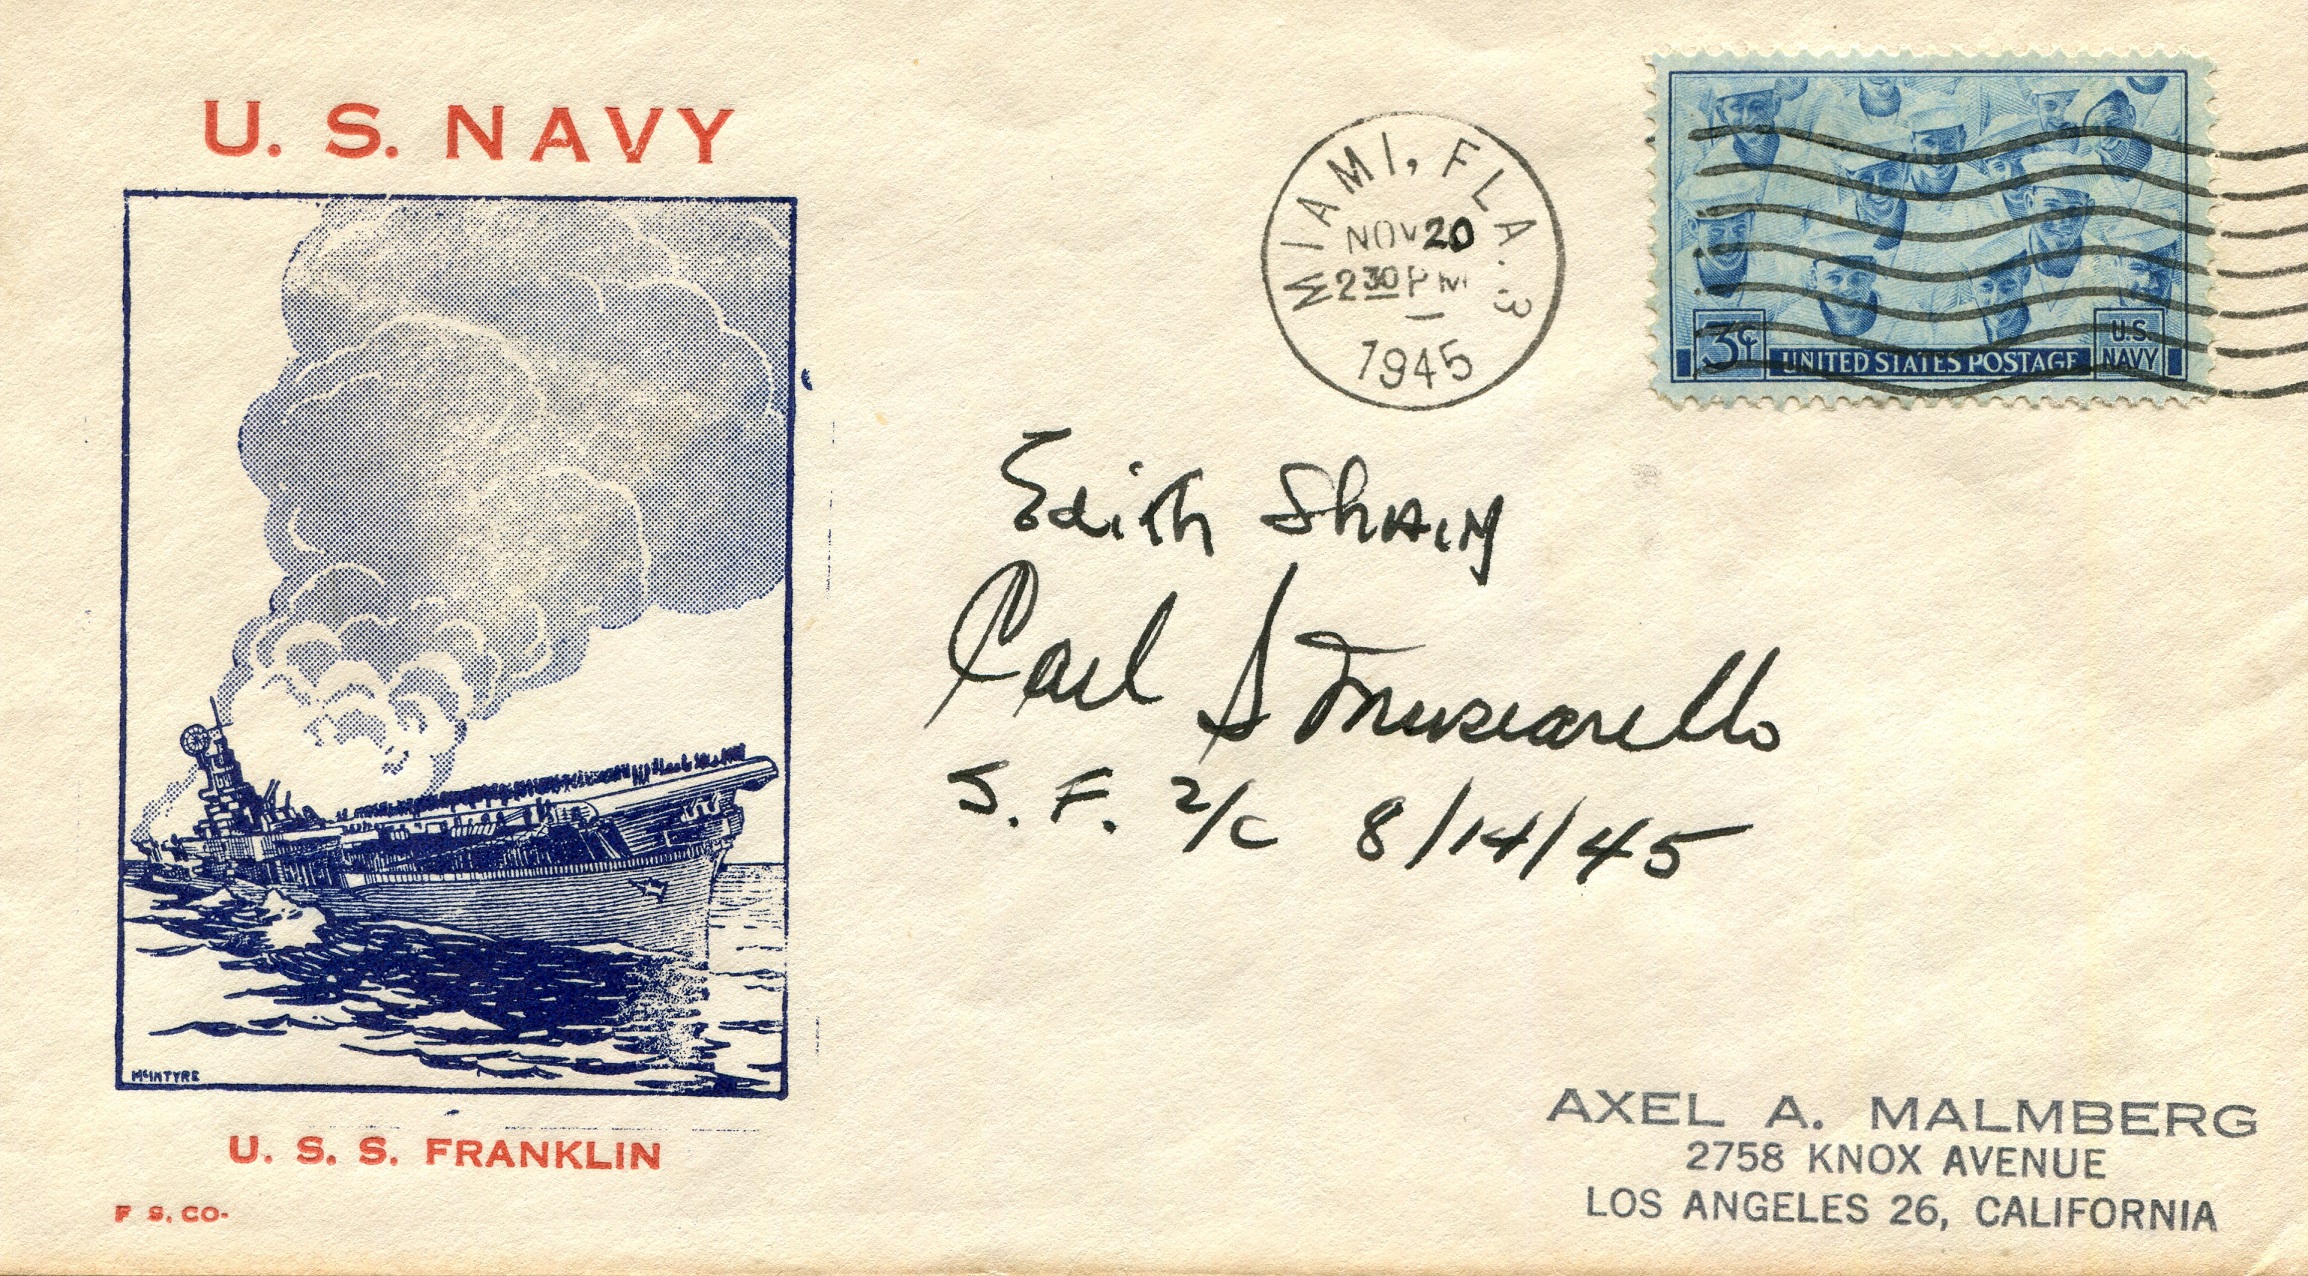 [VJ DAY KISS]: A vintage United States Navy commemorative cover issued in honour of the U.S.S.